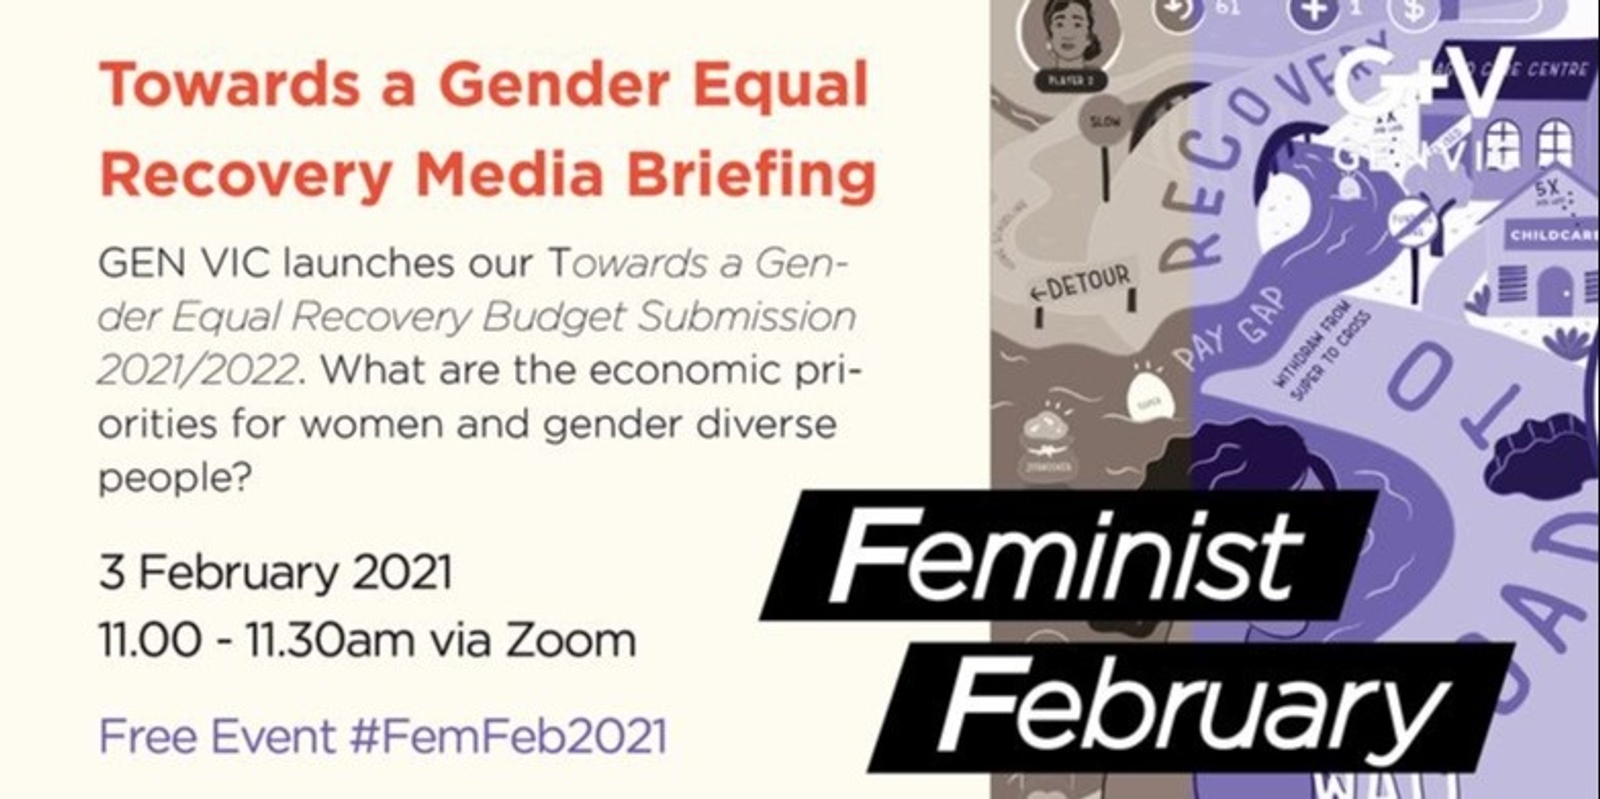 Banner image for Towards a Gender Equal Recovery Budget Submission 2021/2022 Media Briefing